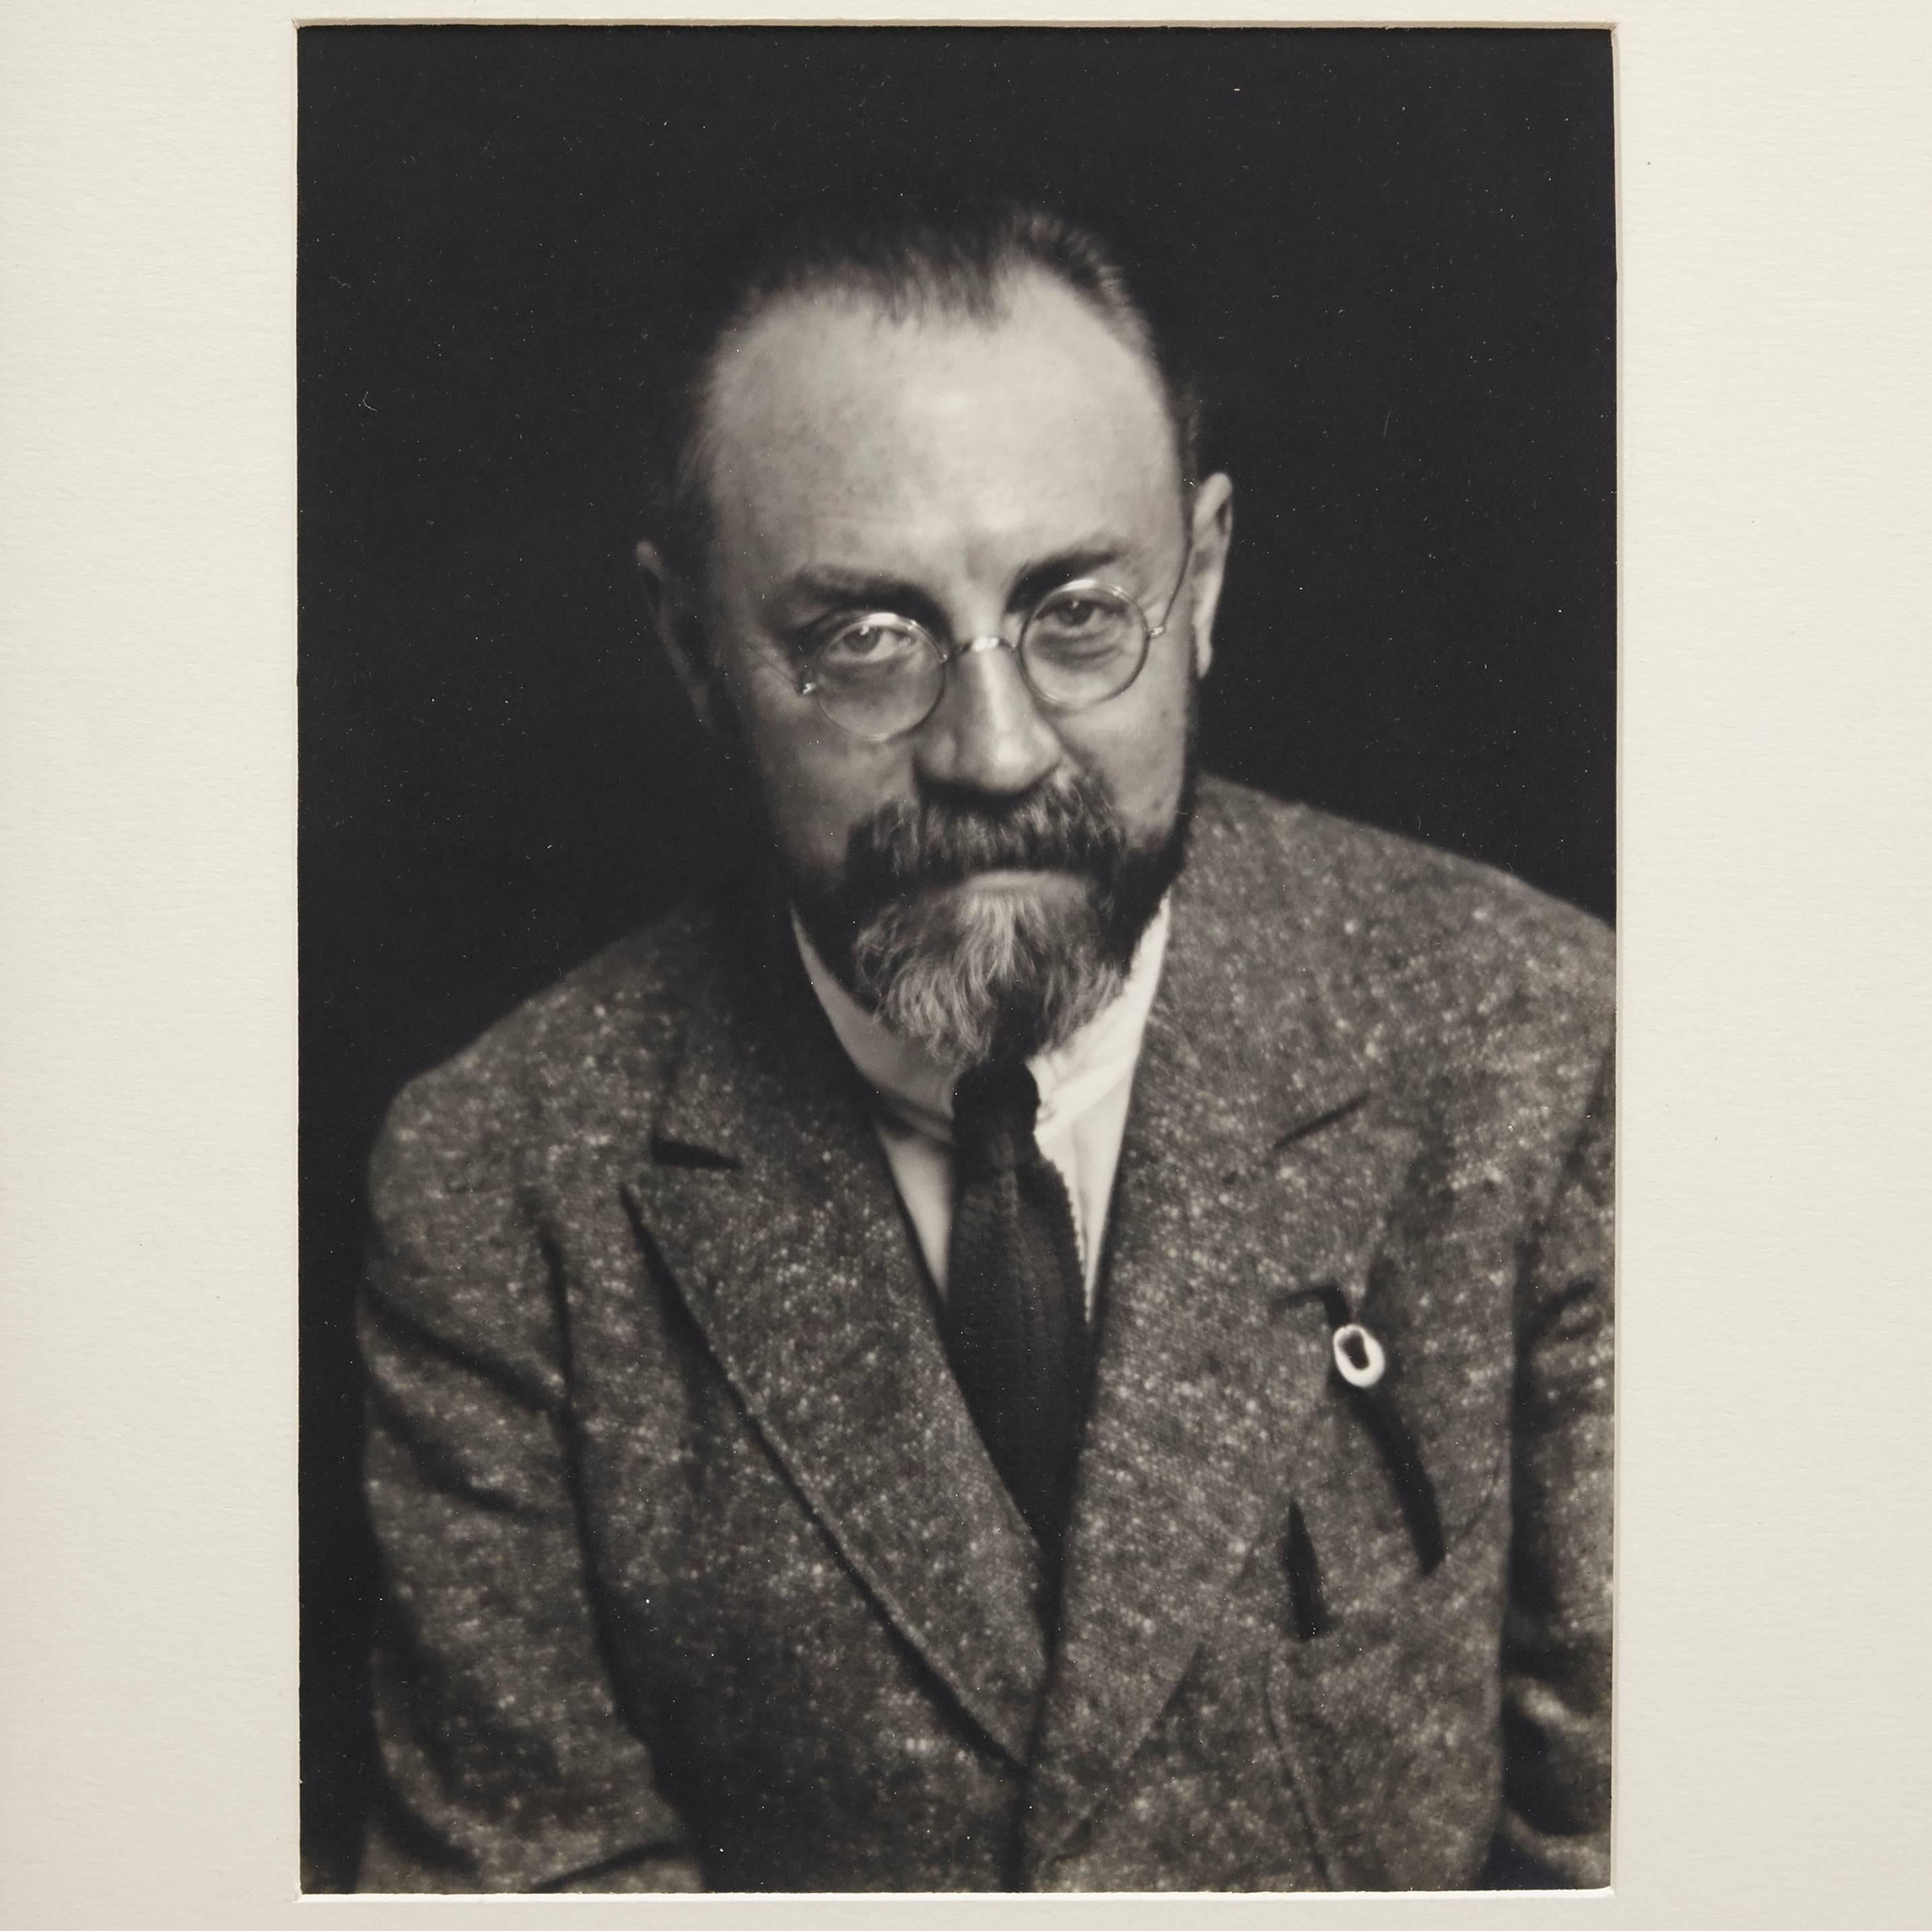 Portrait of Henri Matisse photographed by Man Ray, circa 1930.

A posthumous print from the original negative in 1977 by Pierre Gassmann.

Gelatin silver bromide.

Born (Philadelphia, 1890-Paris, 1976) Emmanuel Radnitzky, Man Ray adopted his